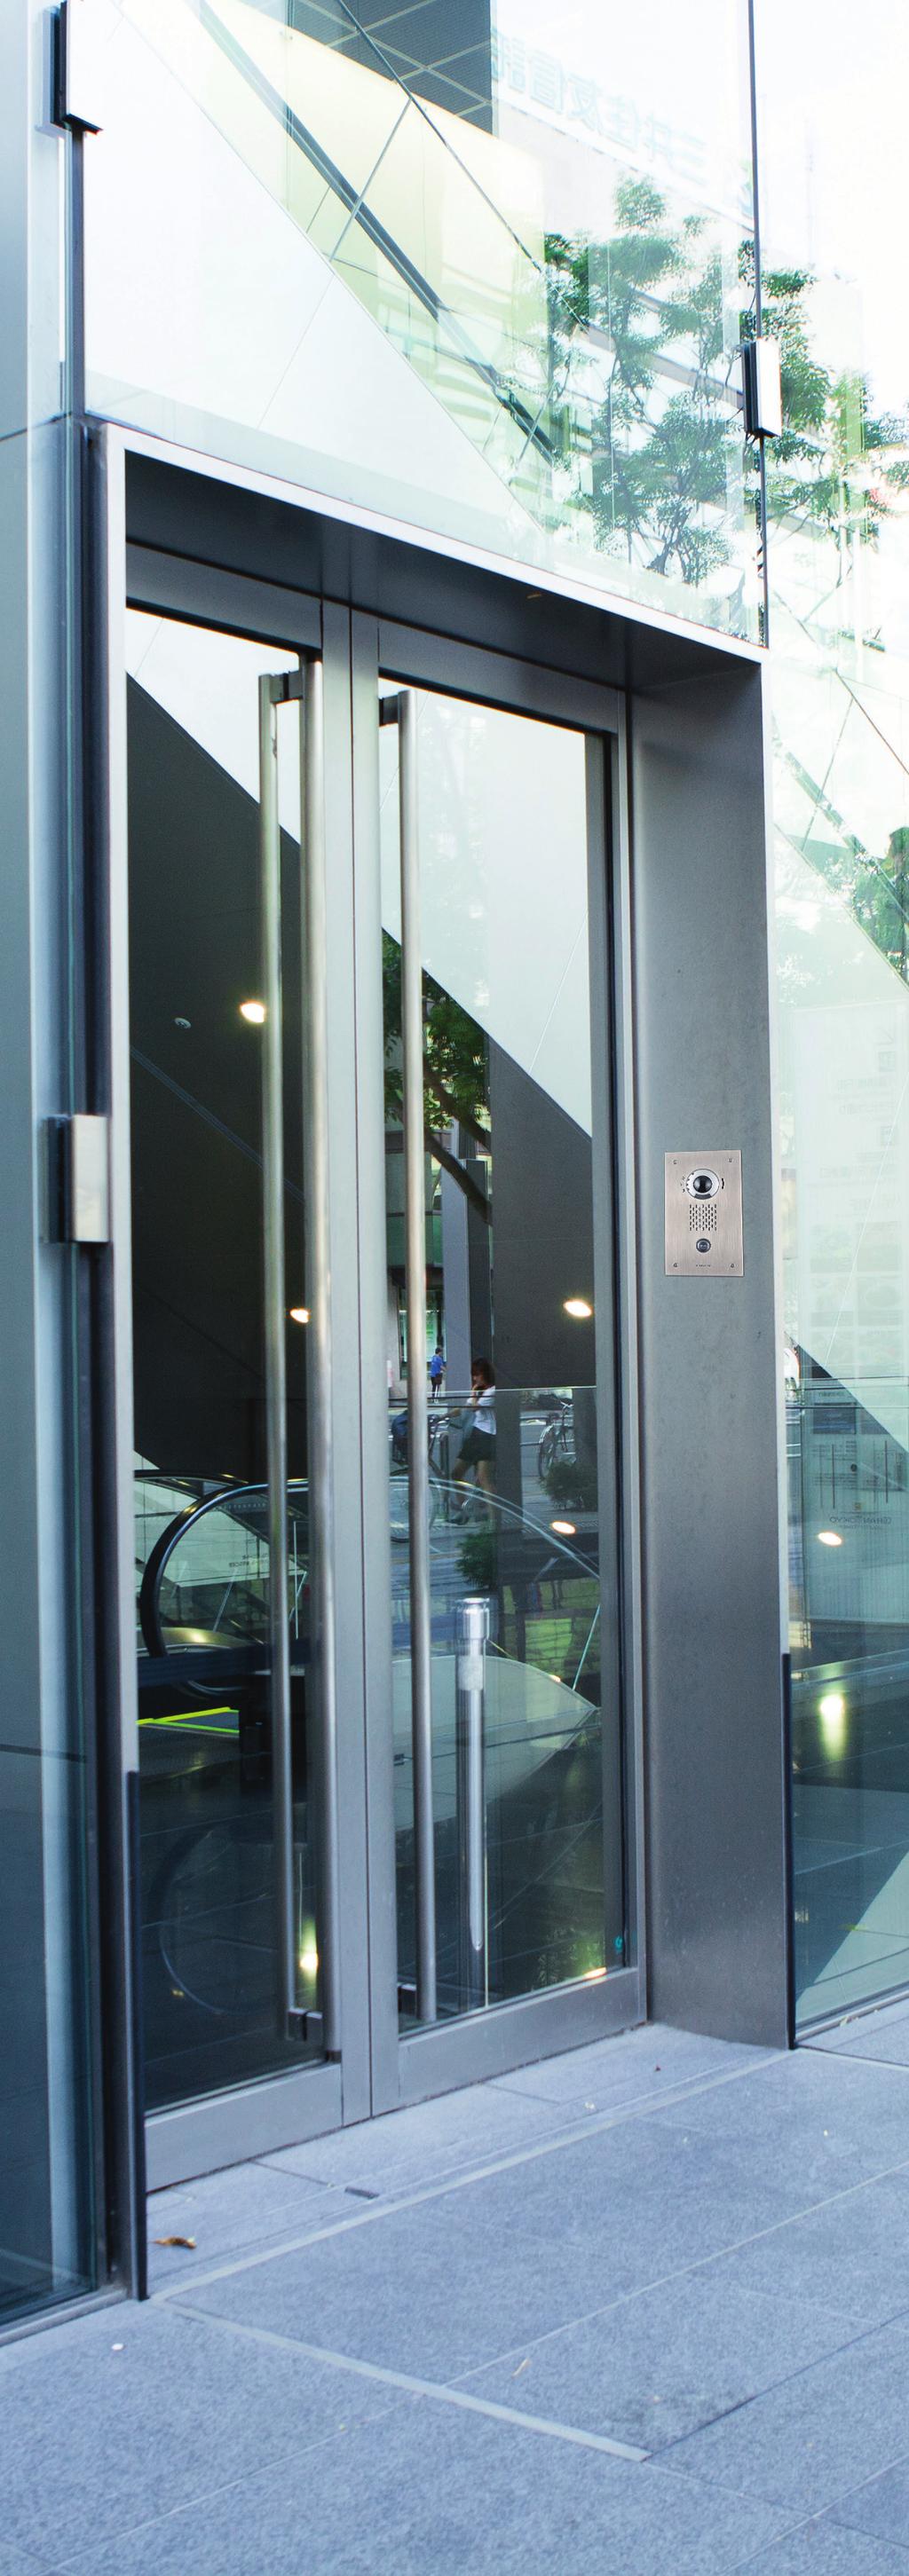 Integrated IP intercom and security solution